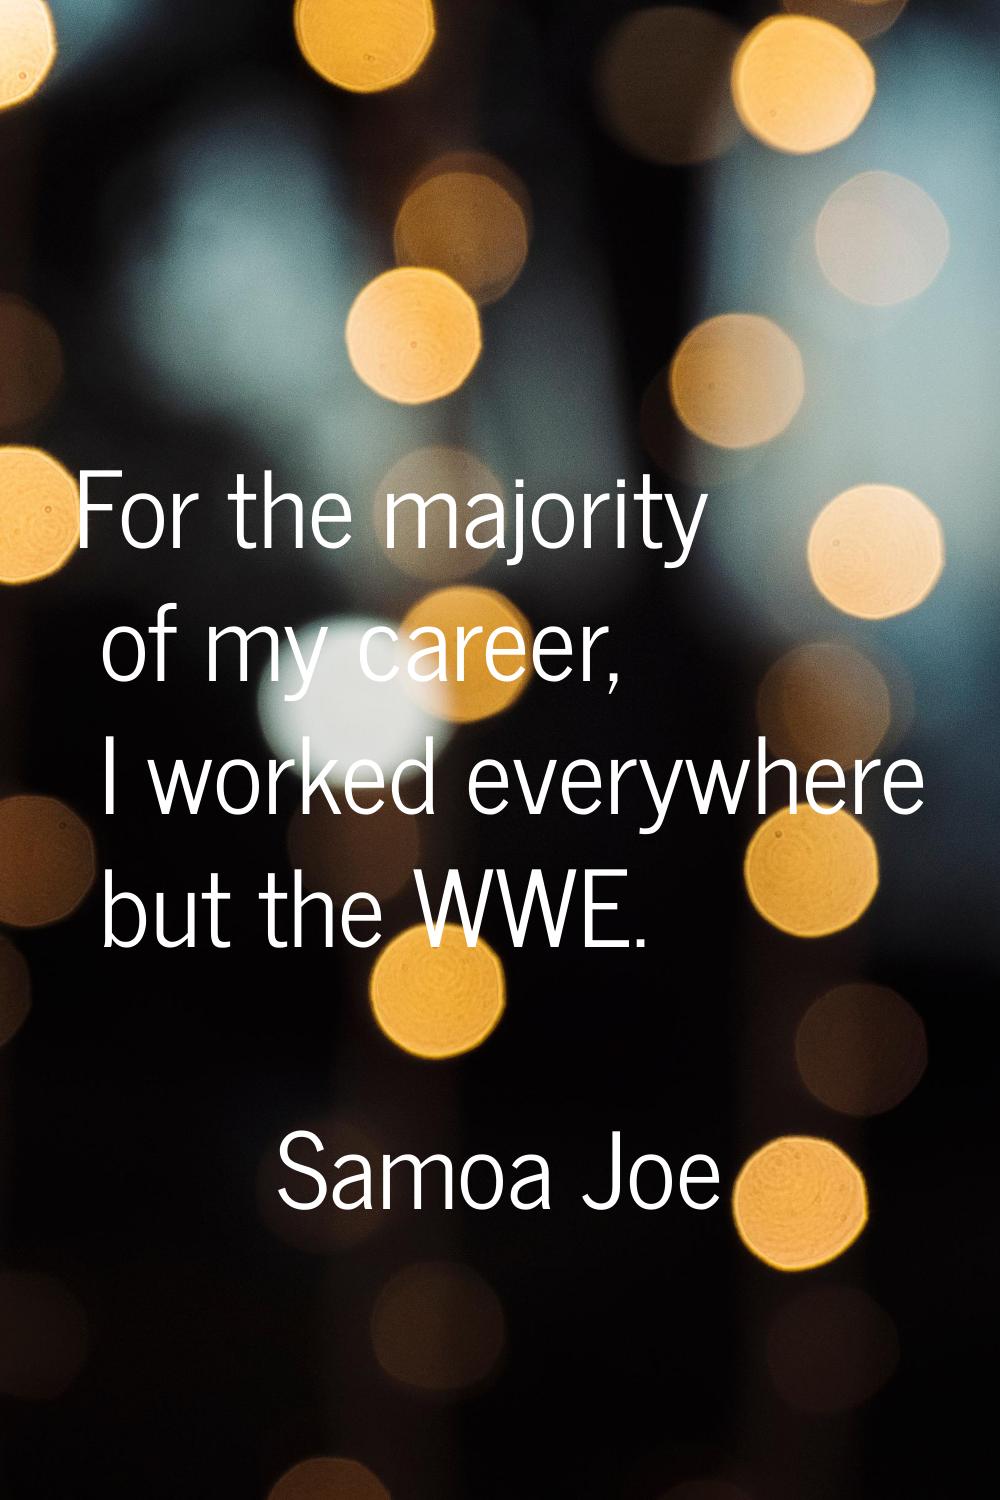 For the majority of my career, I worked everywhere but the WWE.